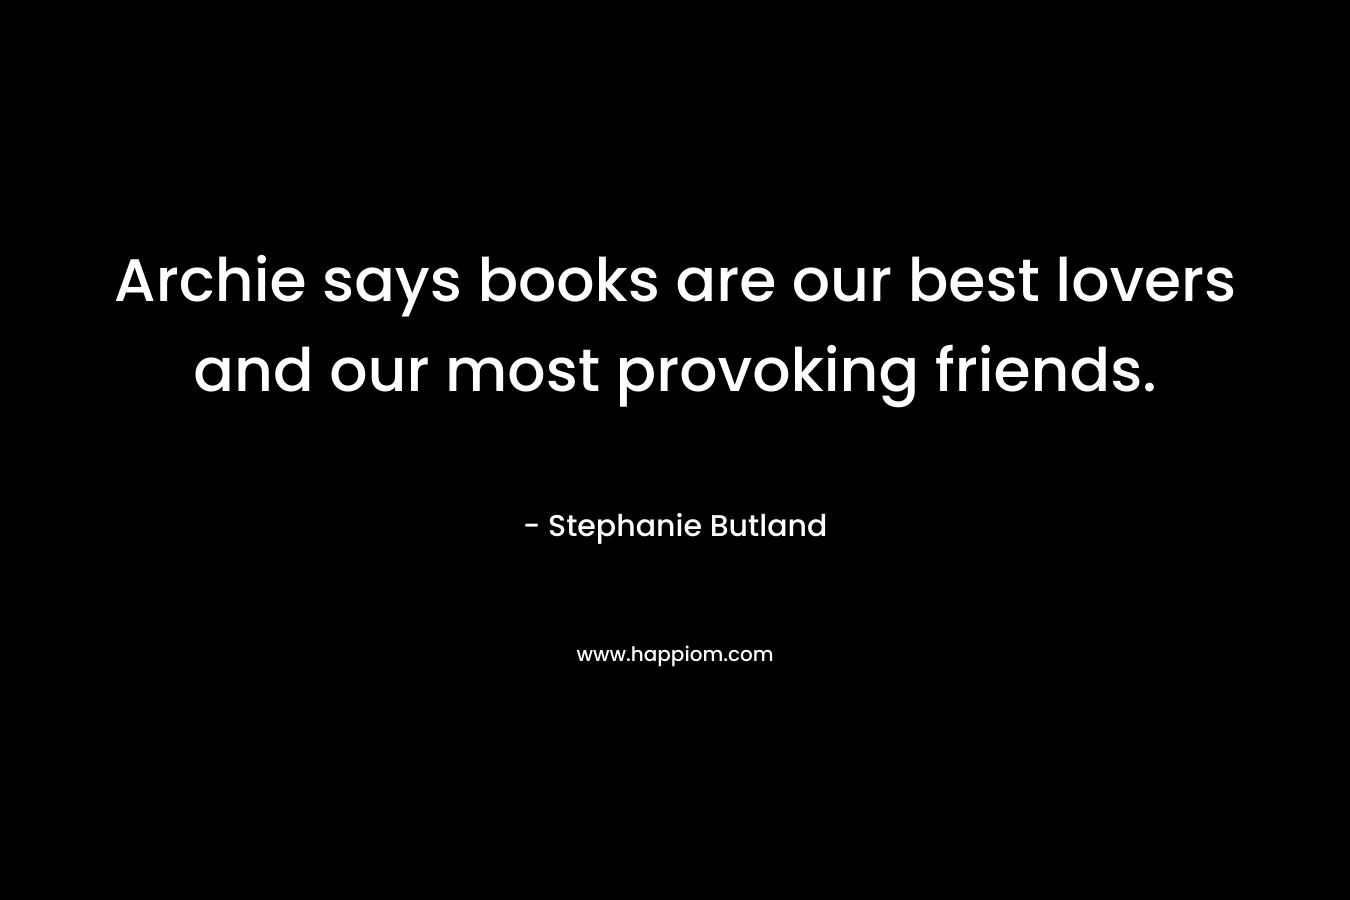 Archie says books are our best lovers and our most provoking friends. – Stephanie Butland